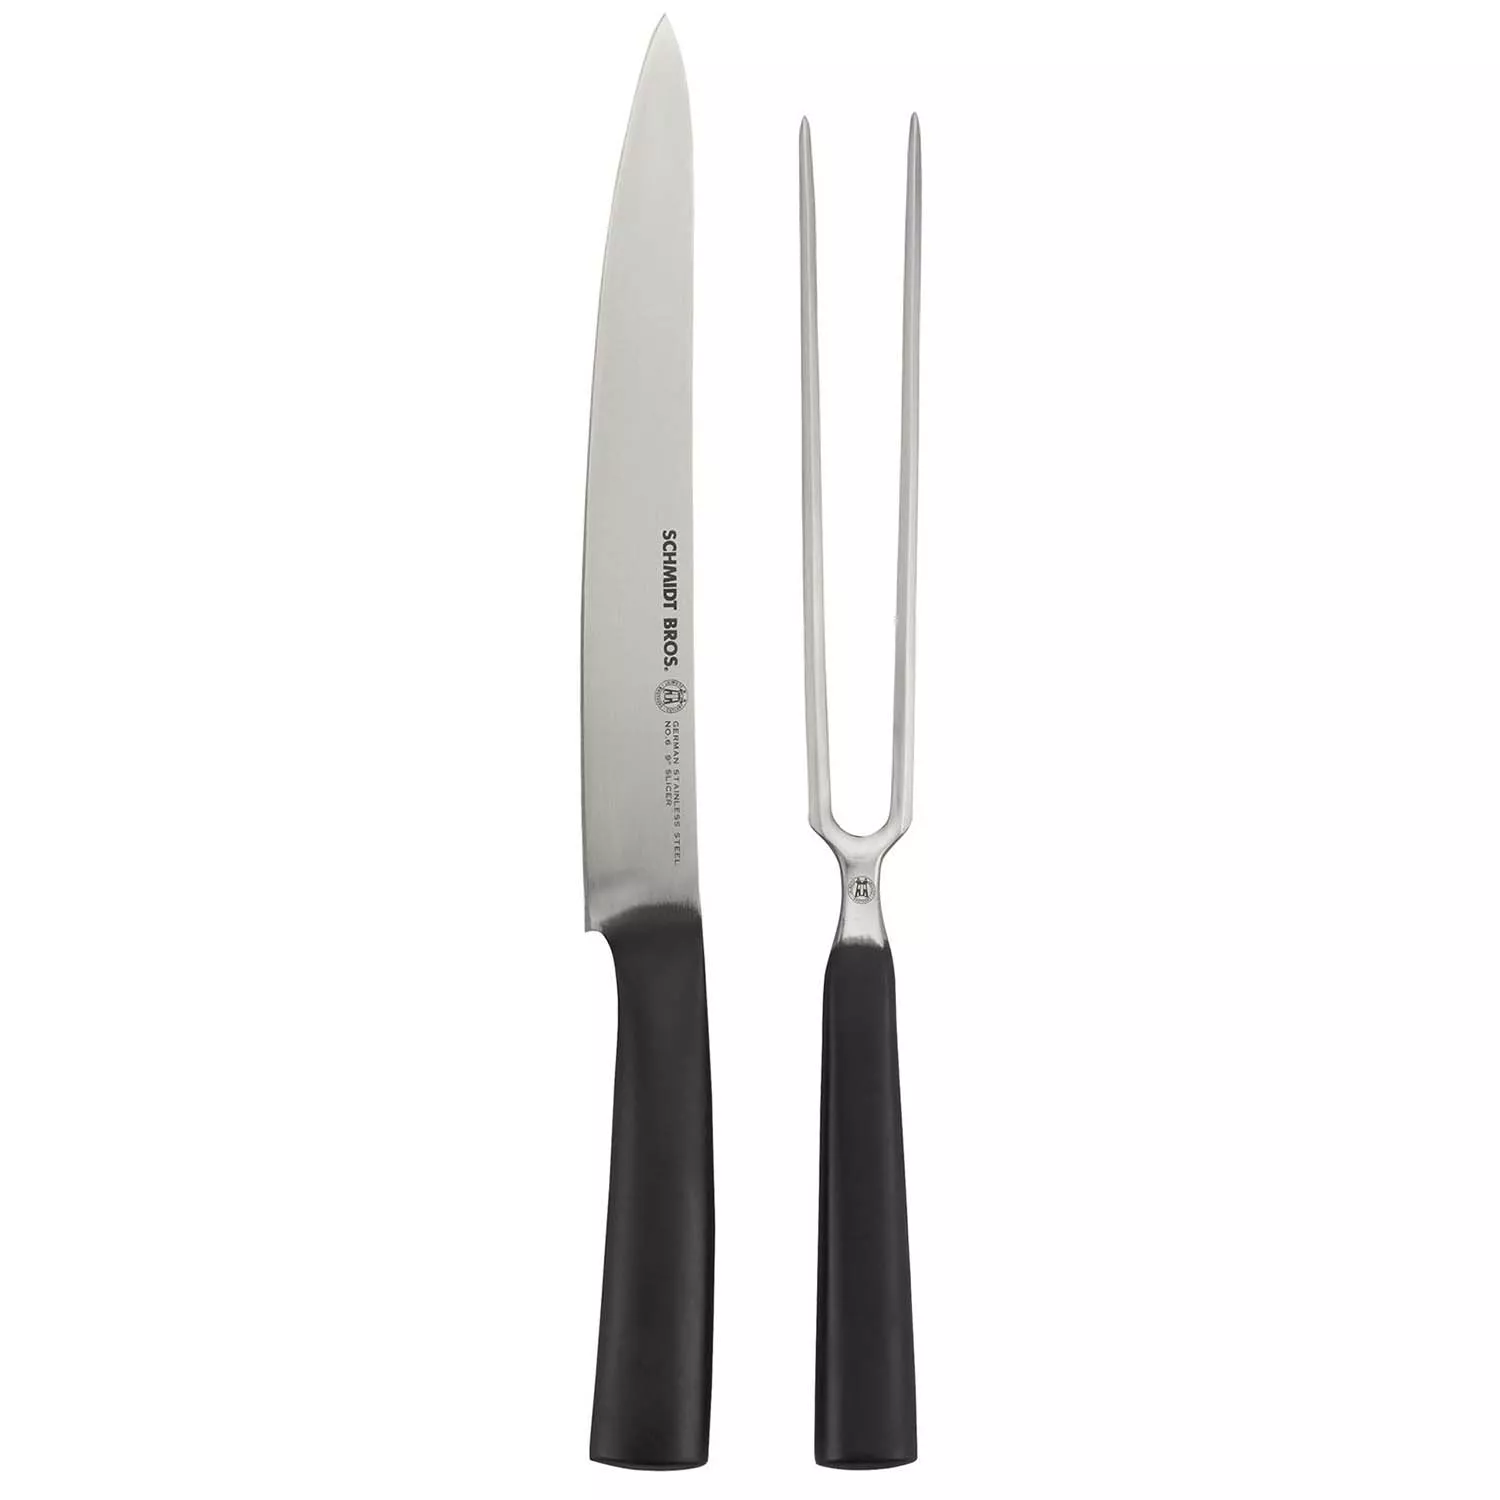 Schmidt Brothers Cutlery Heritage Series Chef Knife, 6